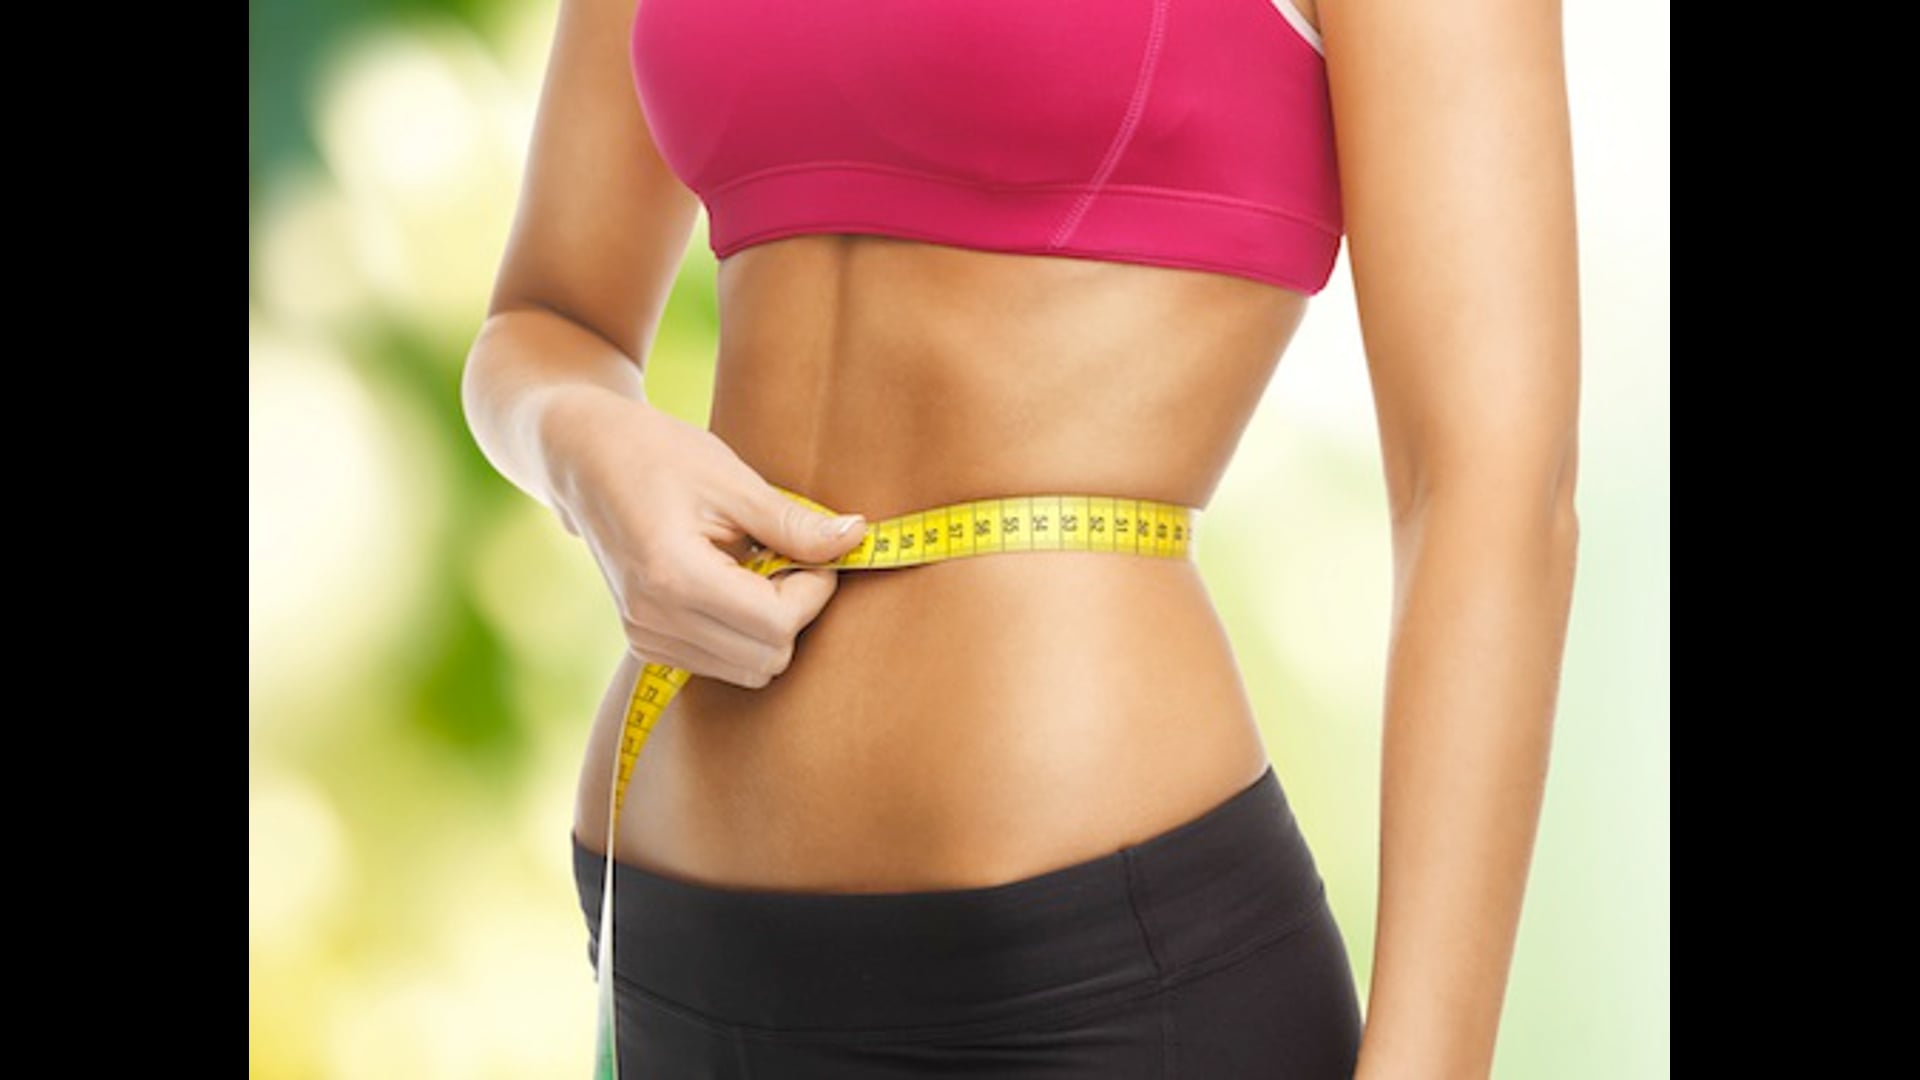 Why Dieting Causes Weight Gain